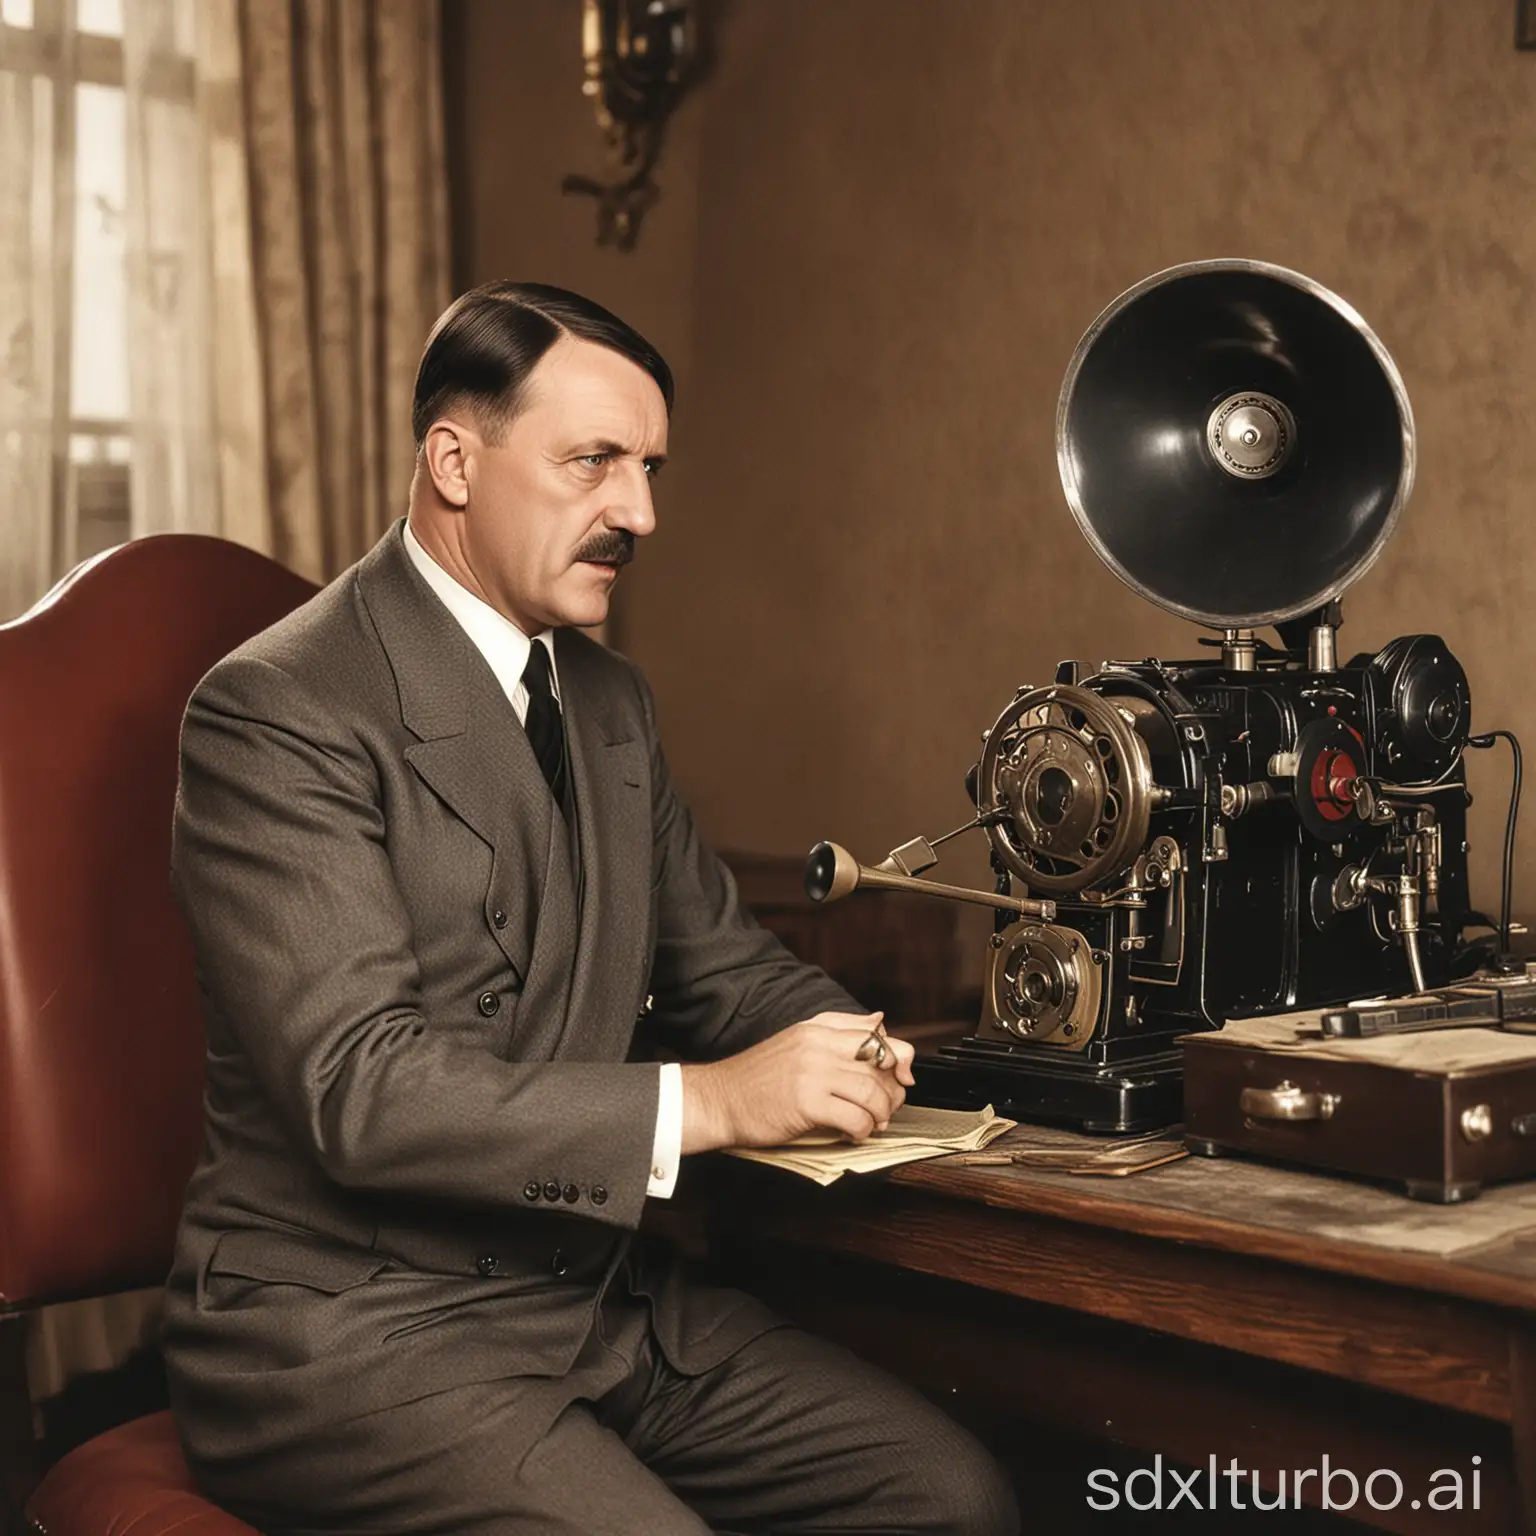 Adolf-Hitler-Sitting-Next-to-Old-Style-Gramophone-in-Historical-Photograph